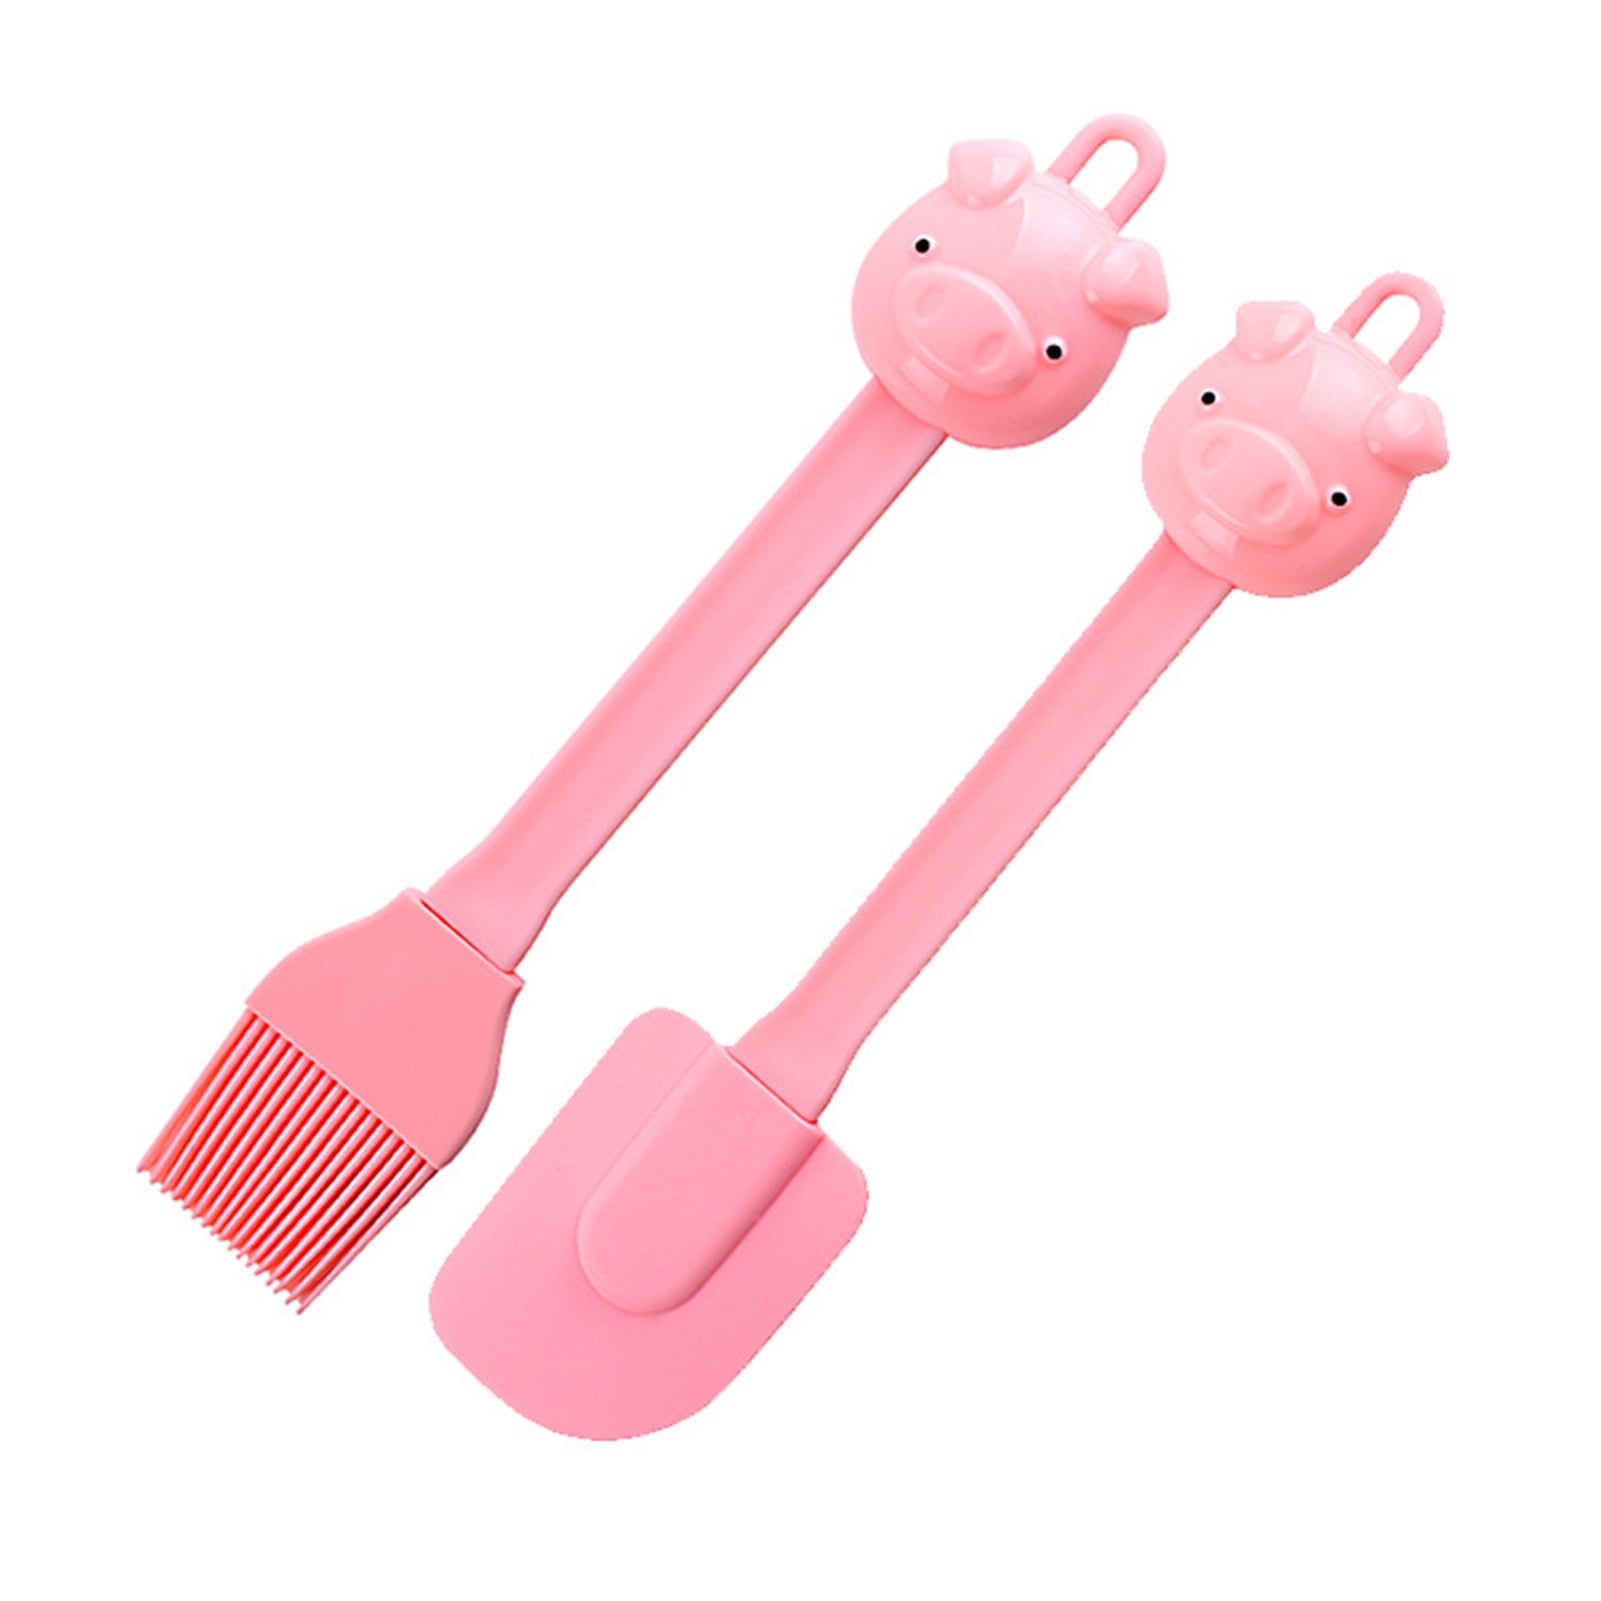  Silicone Kitchenware Silicone baking gadgets Mengqu Silicone  Levelling Devices Children's Fun Cartoon Baking Tools Set : Home & Kitchen